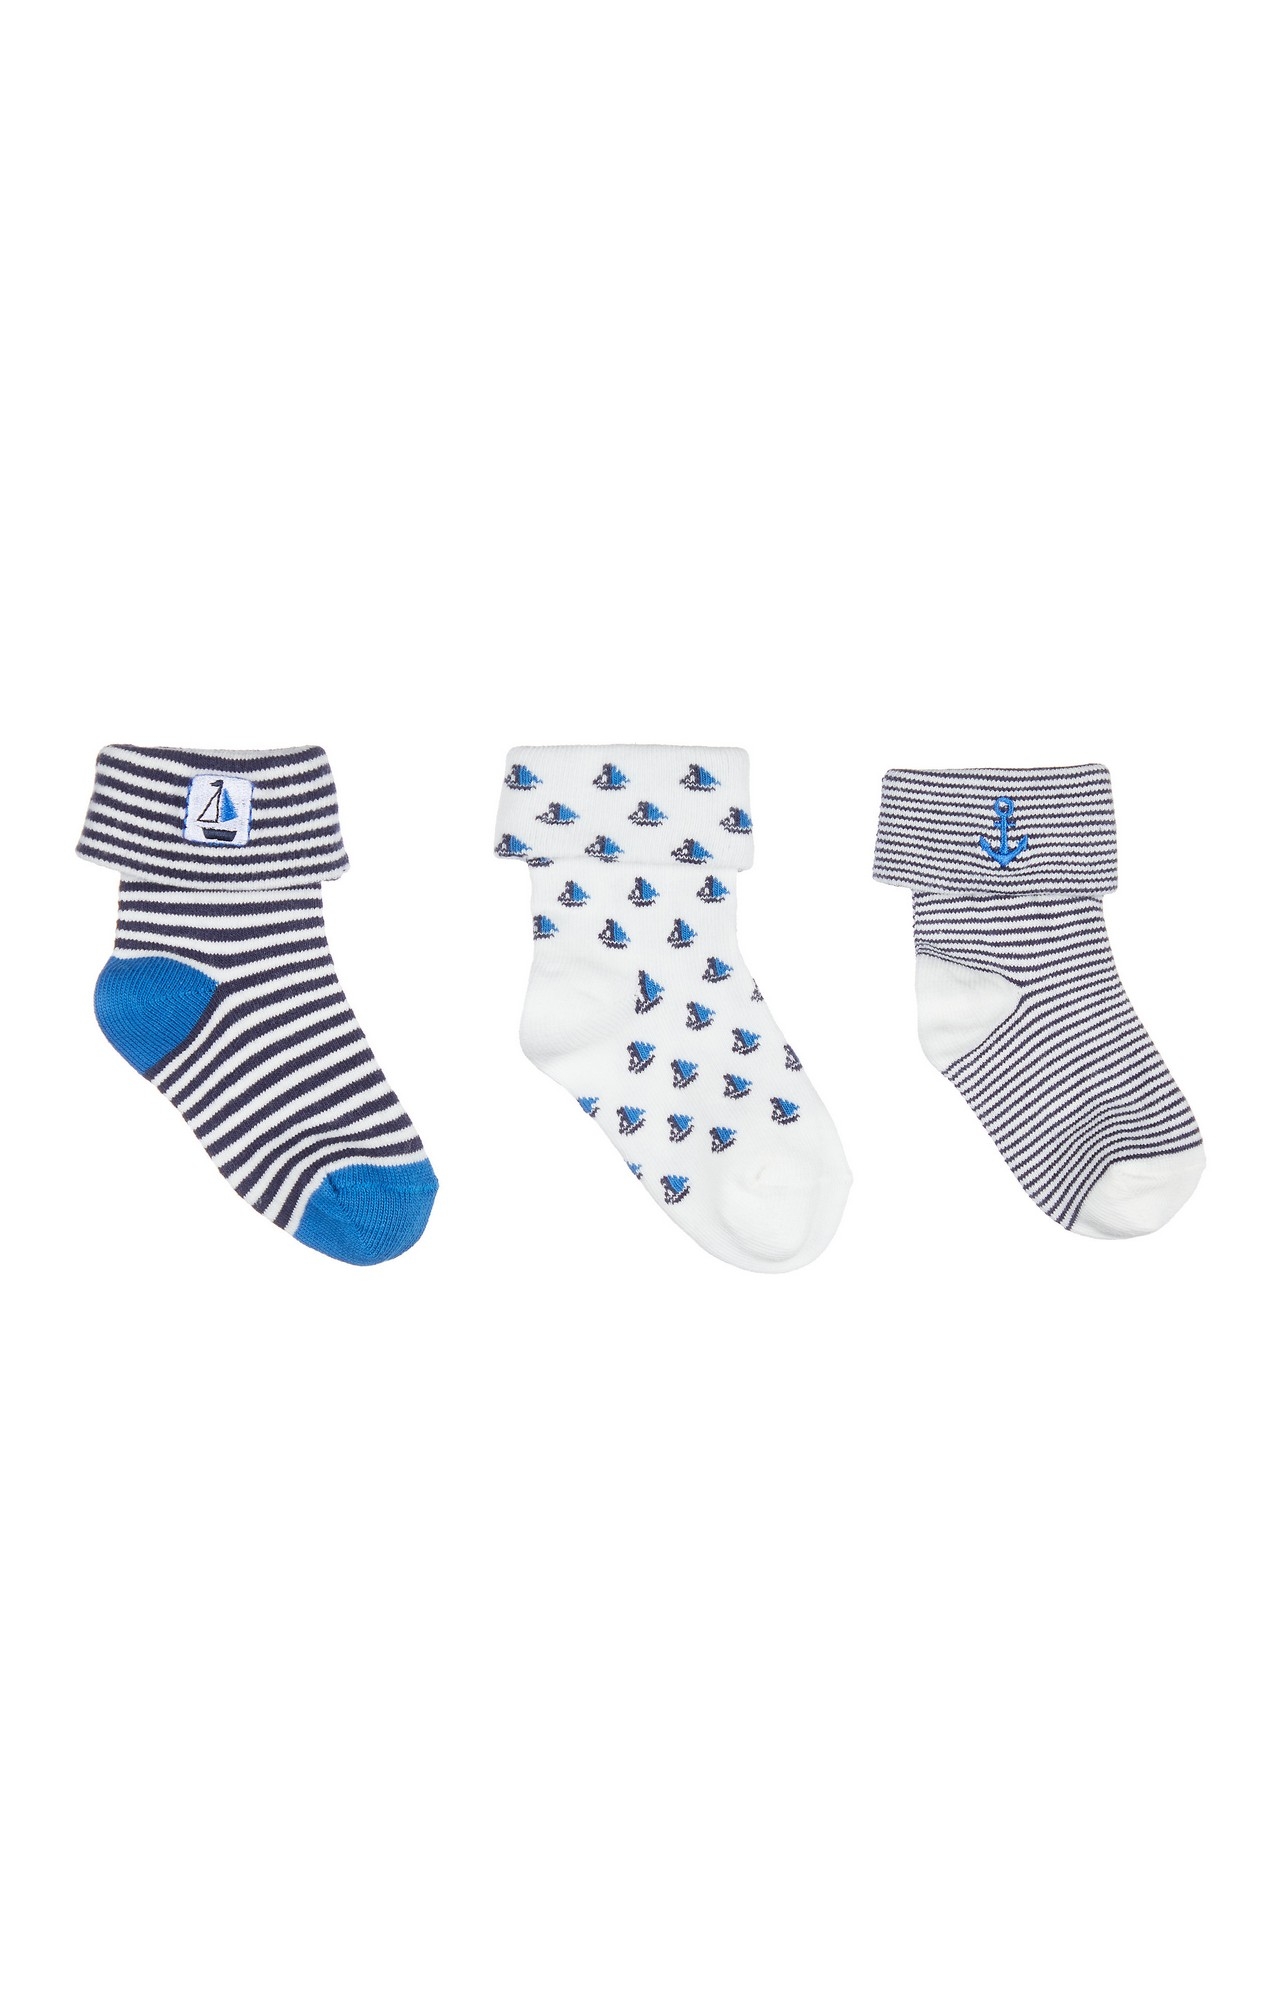 Mothercare | Blue Printed Socks - Pack of 3